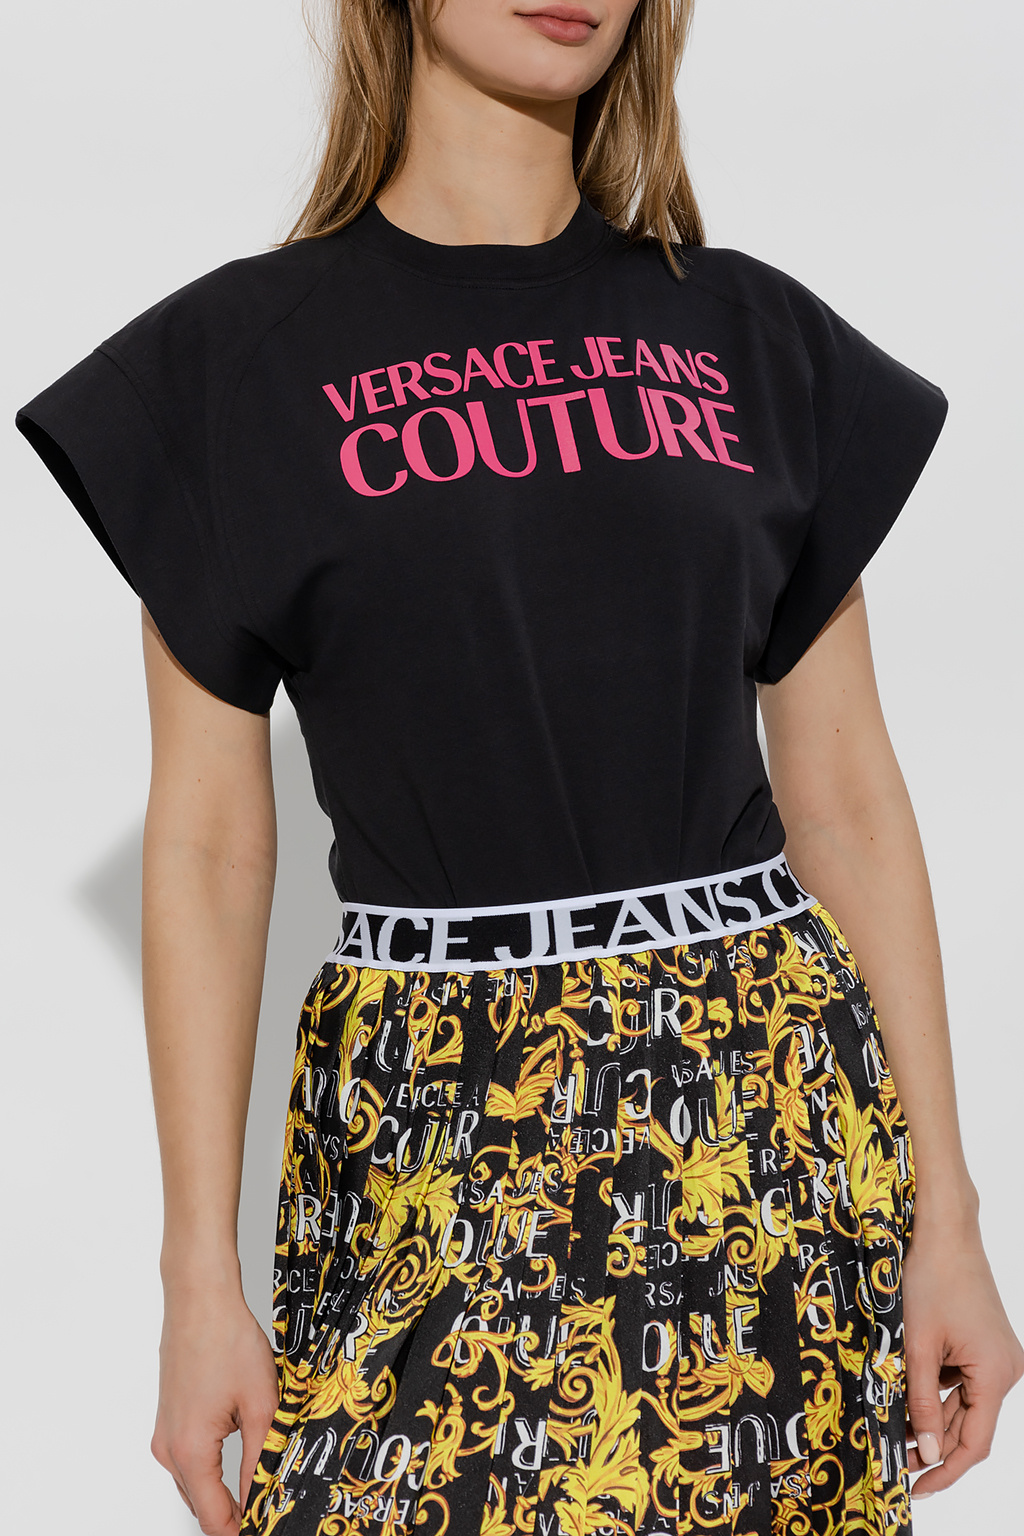 Versace jeans aus Couture Body with logo